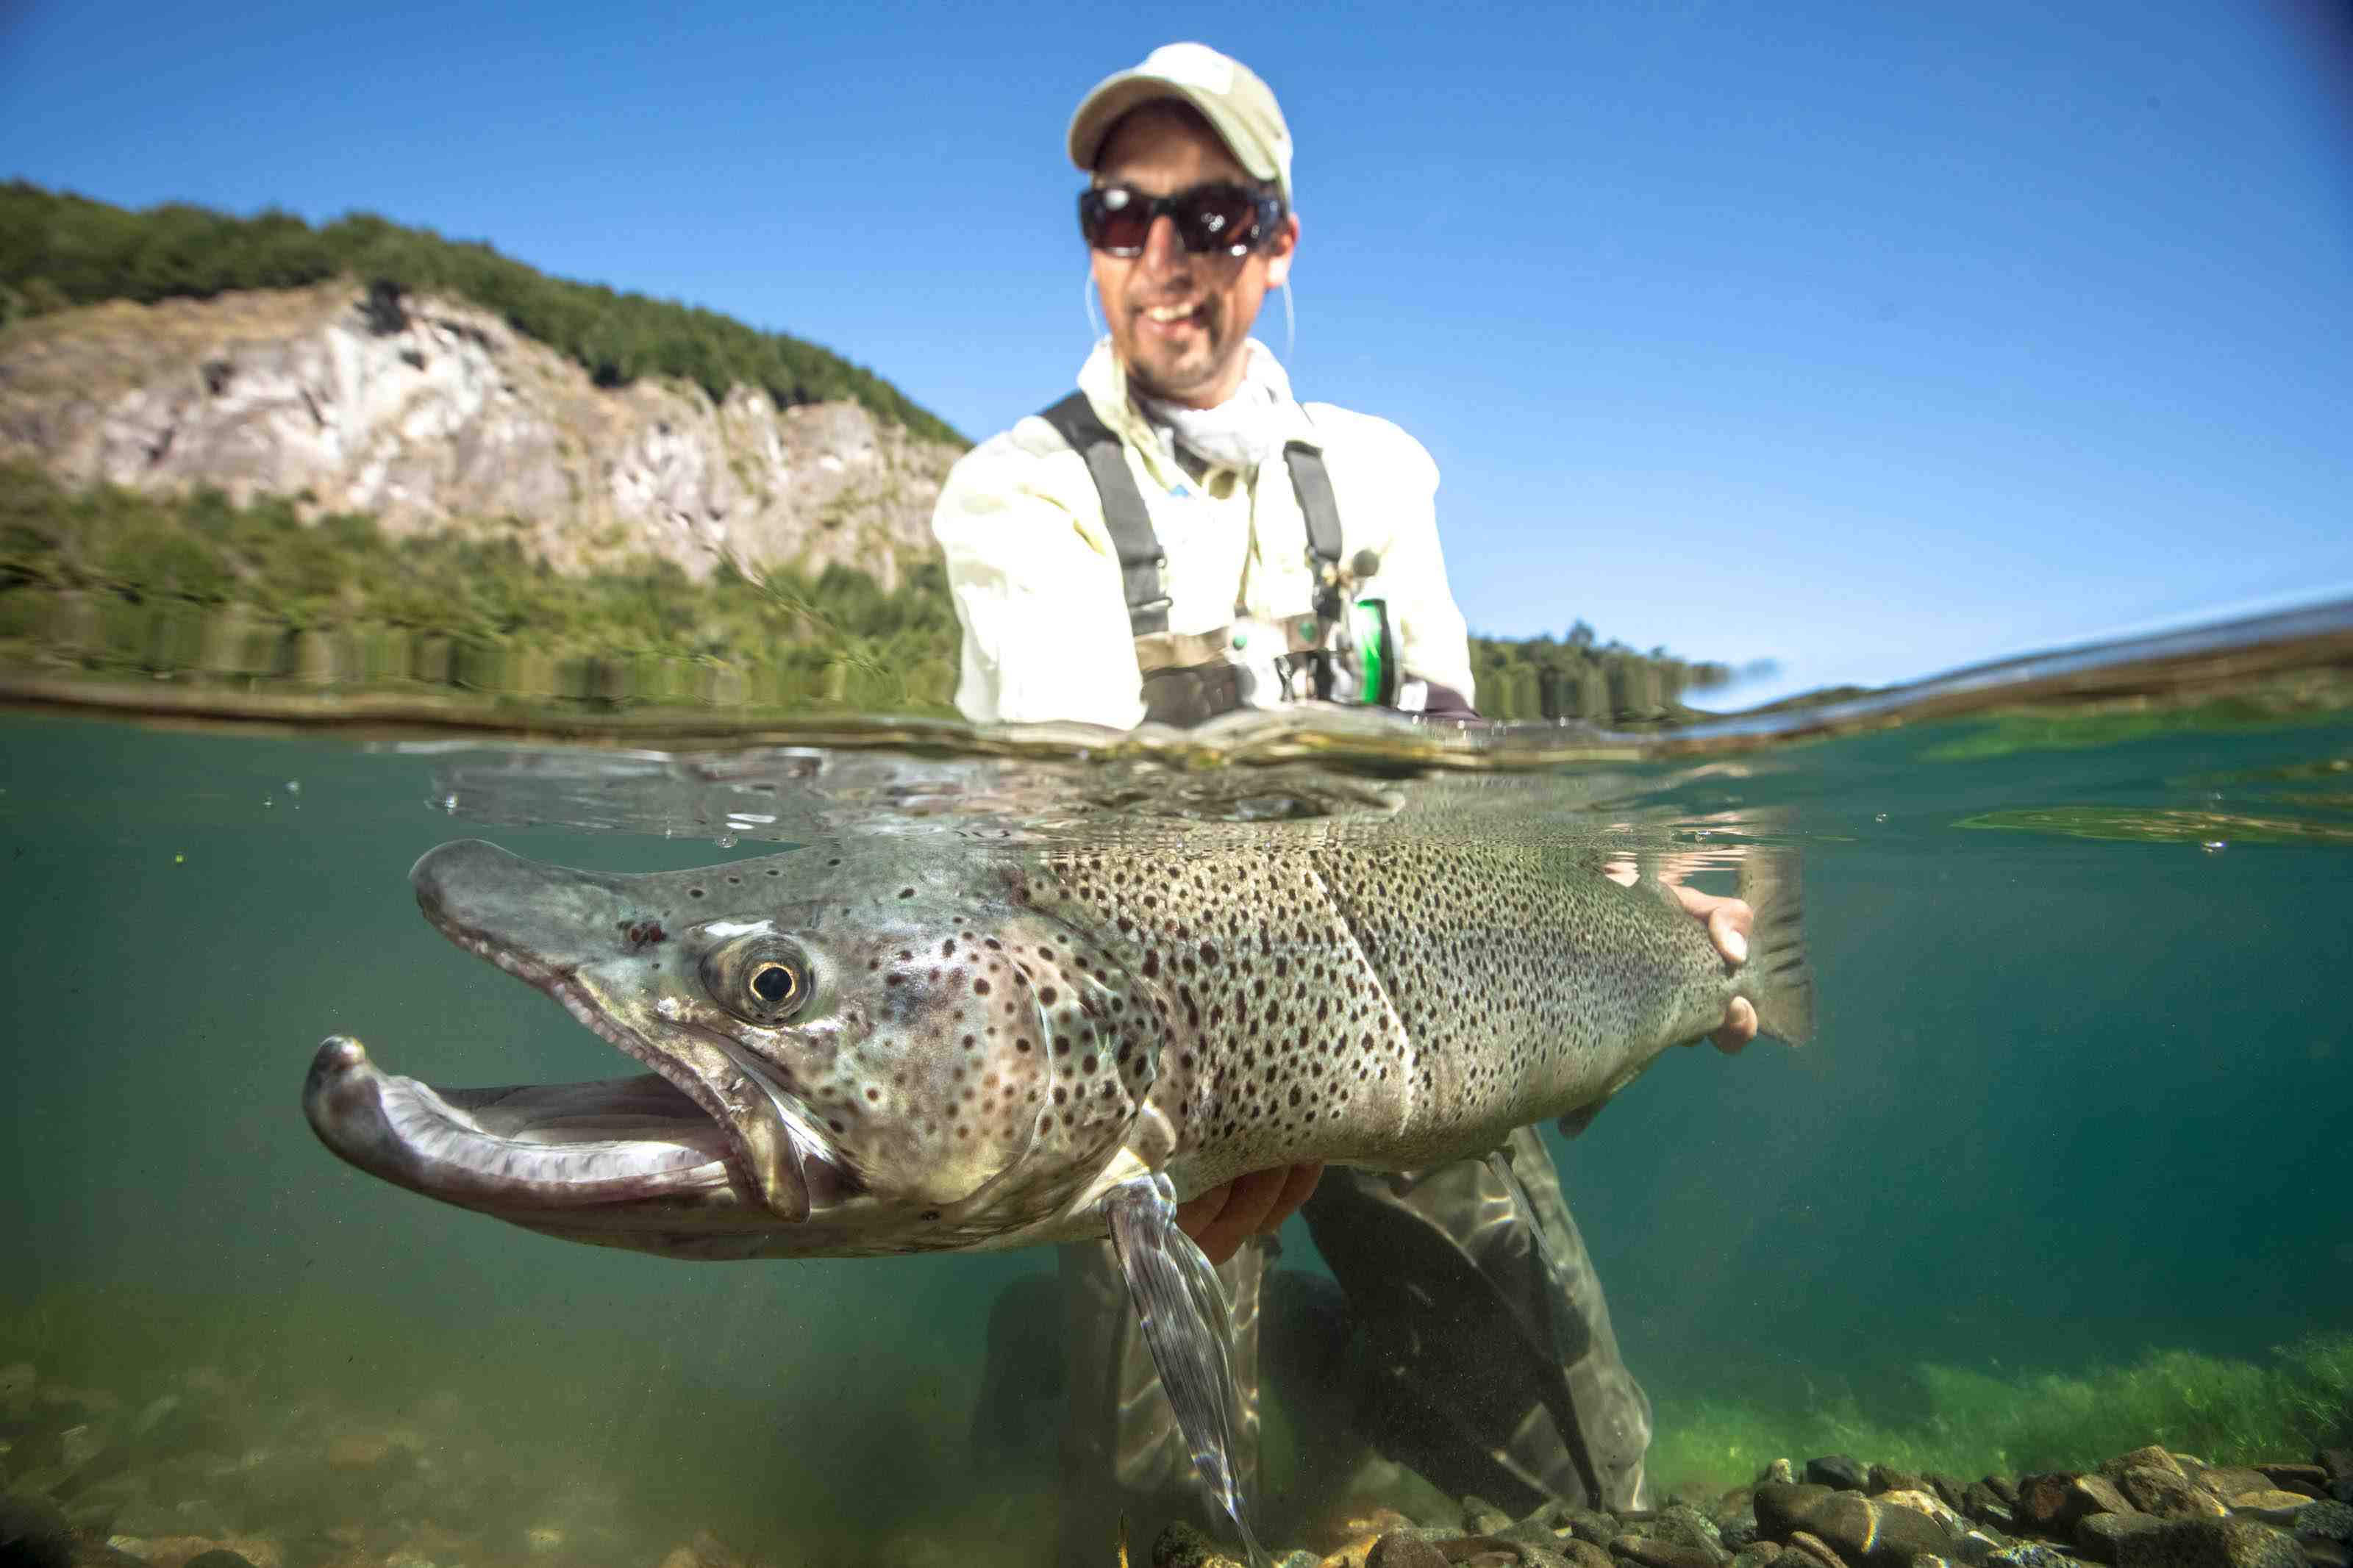 Patagonia River Guides: South, Patagonia trophy trout fishing